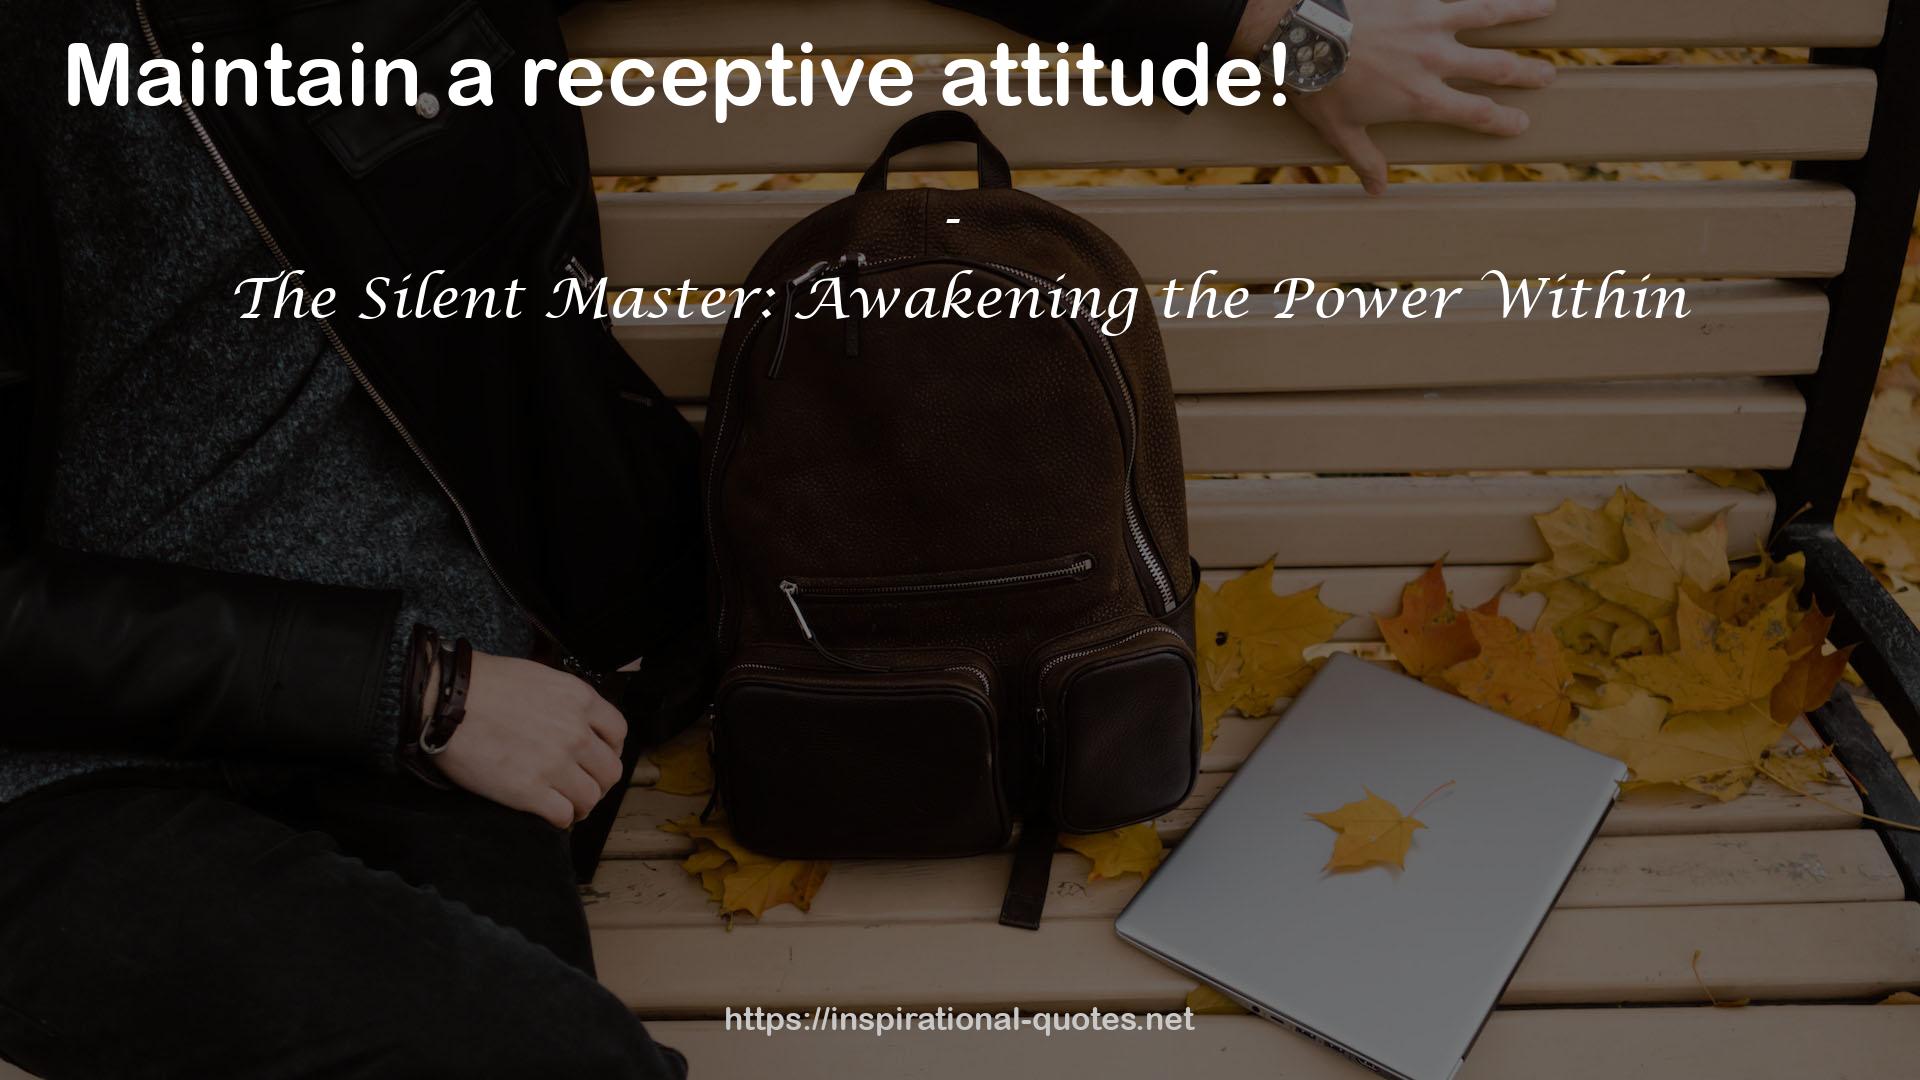 The Silent Master: Awakening the Power Within QUOTES